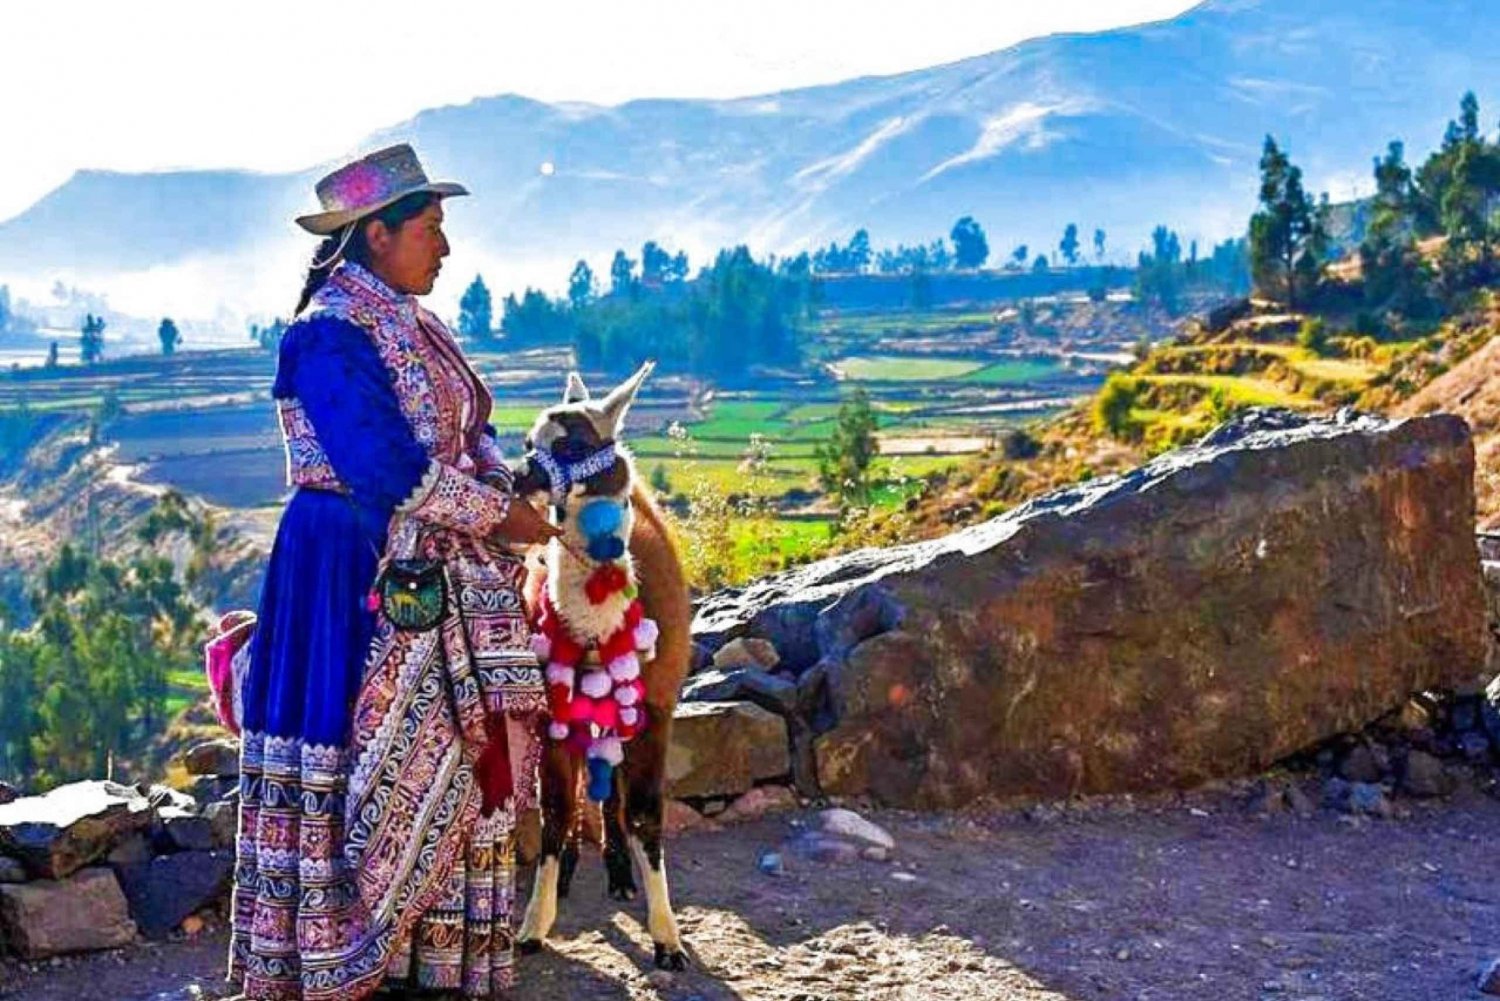 From Arequipa: Day Tour to the Colca Canyon.